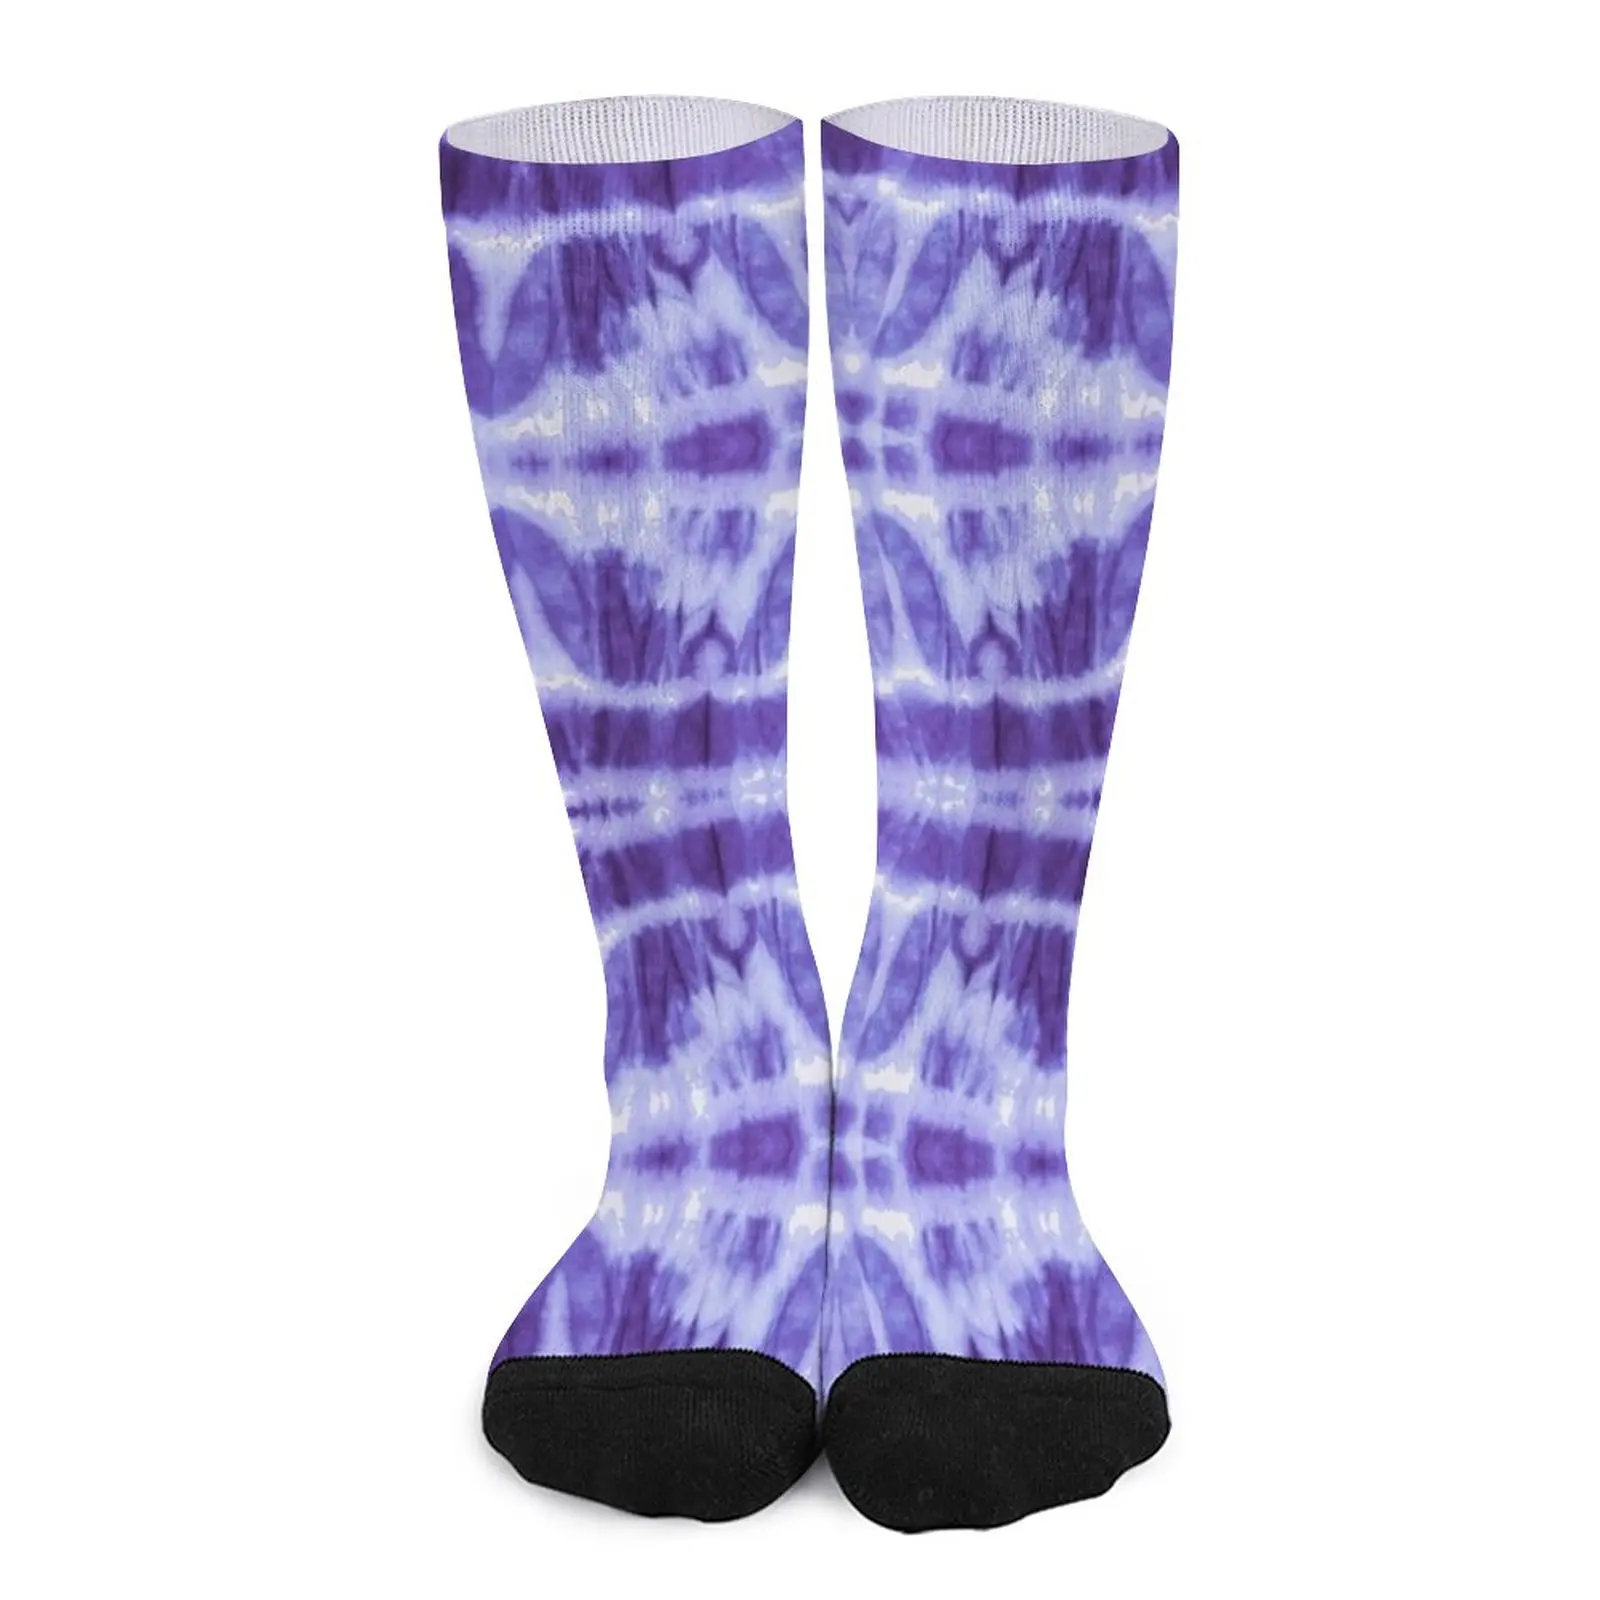 Tie Dye Violet Twos Socks Male sock golf Stockings compression socks ladies ladies winter warm touchscreen fingerless mittens male thickened wool jacquard knitting business work study cycling gloves